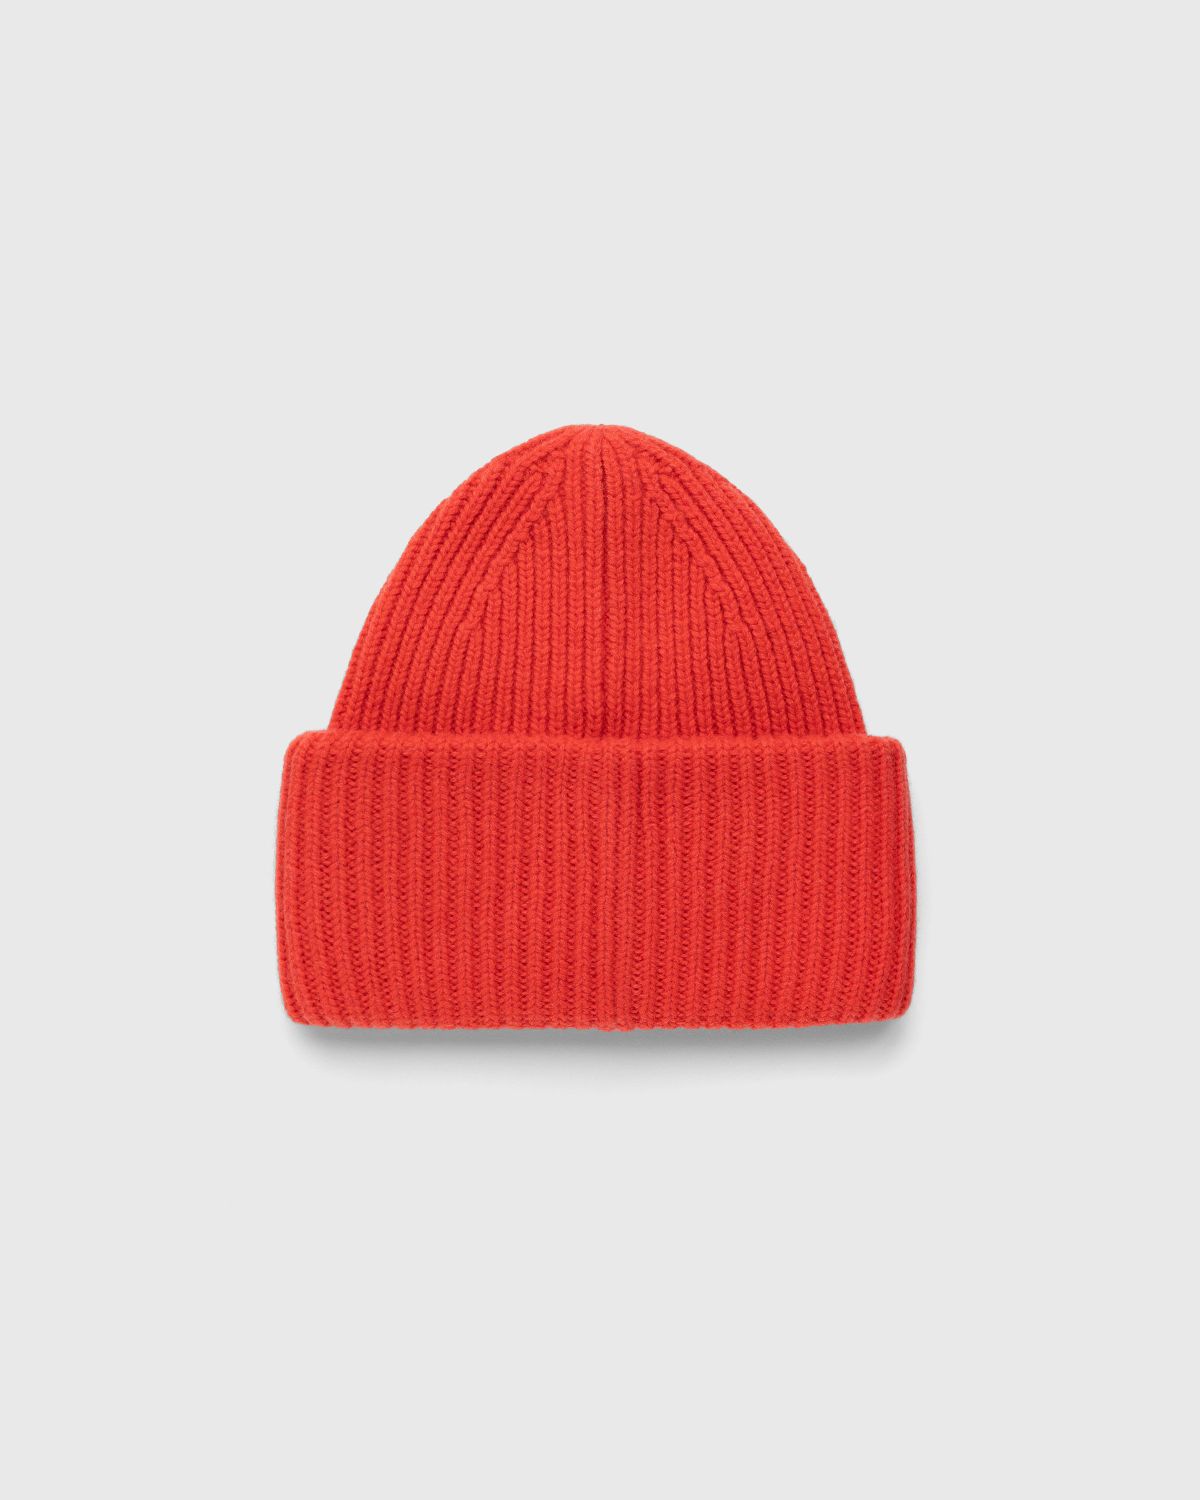 Acne Studios – Large Face Logo Beanie Red - Beanies - Red - Image 2